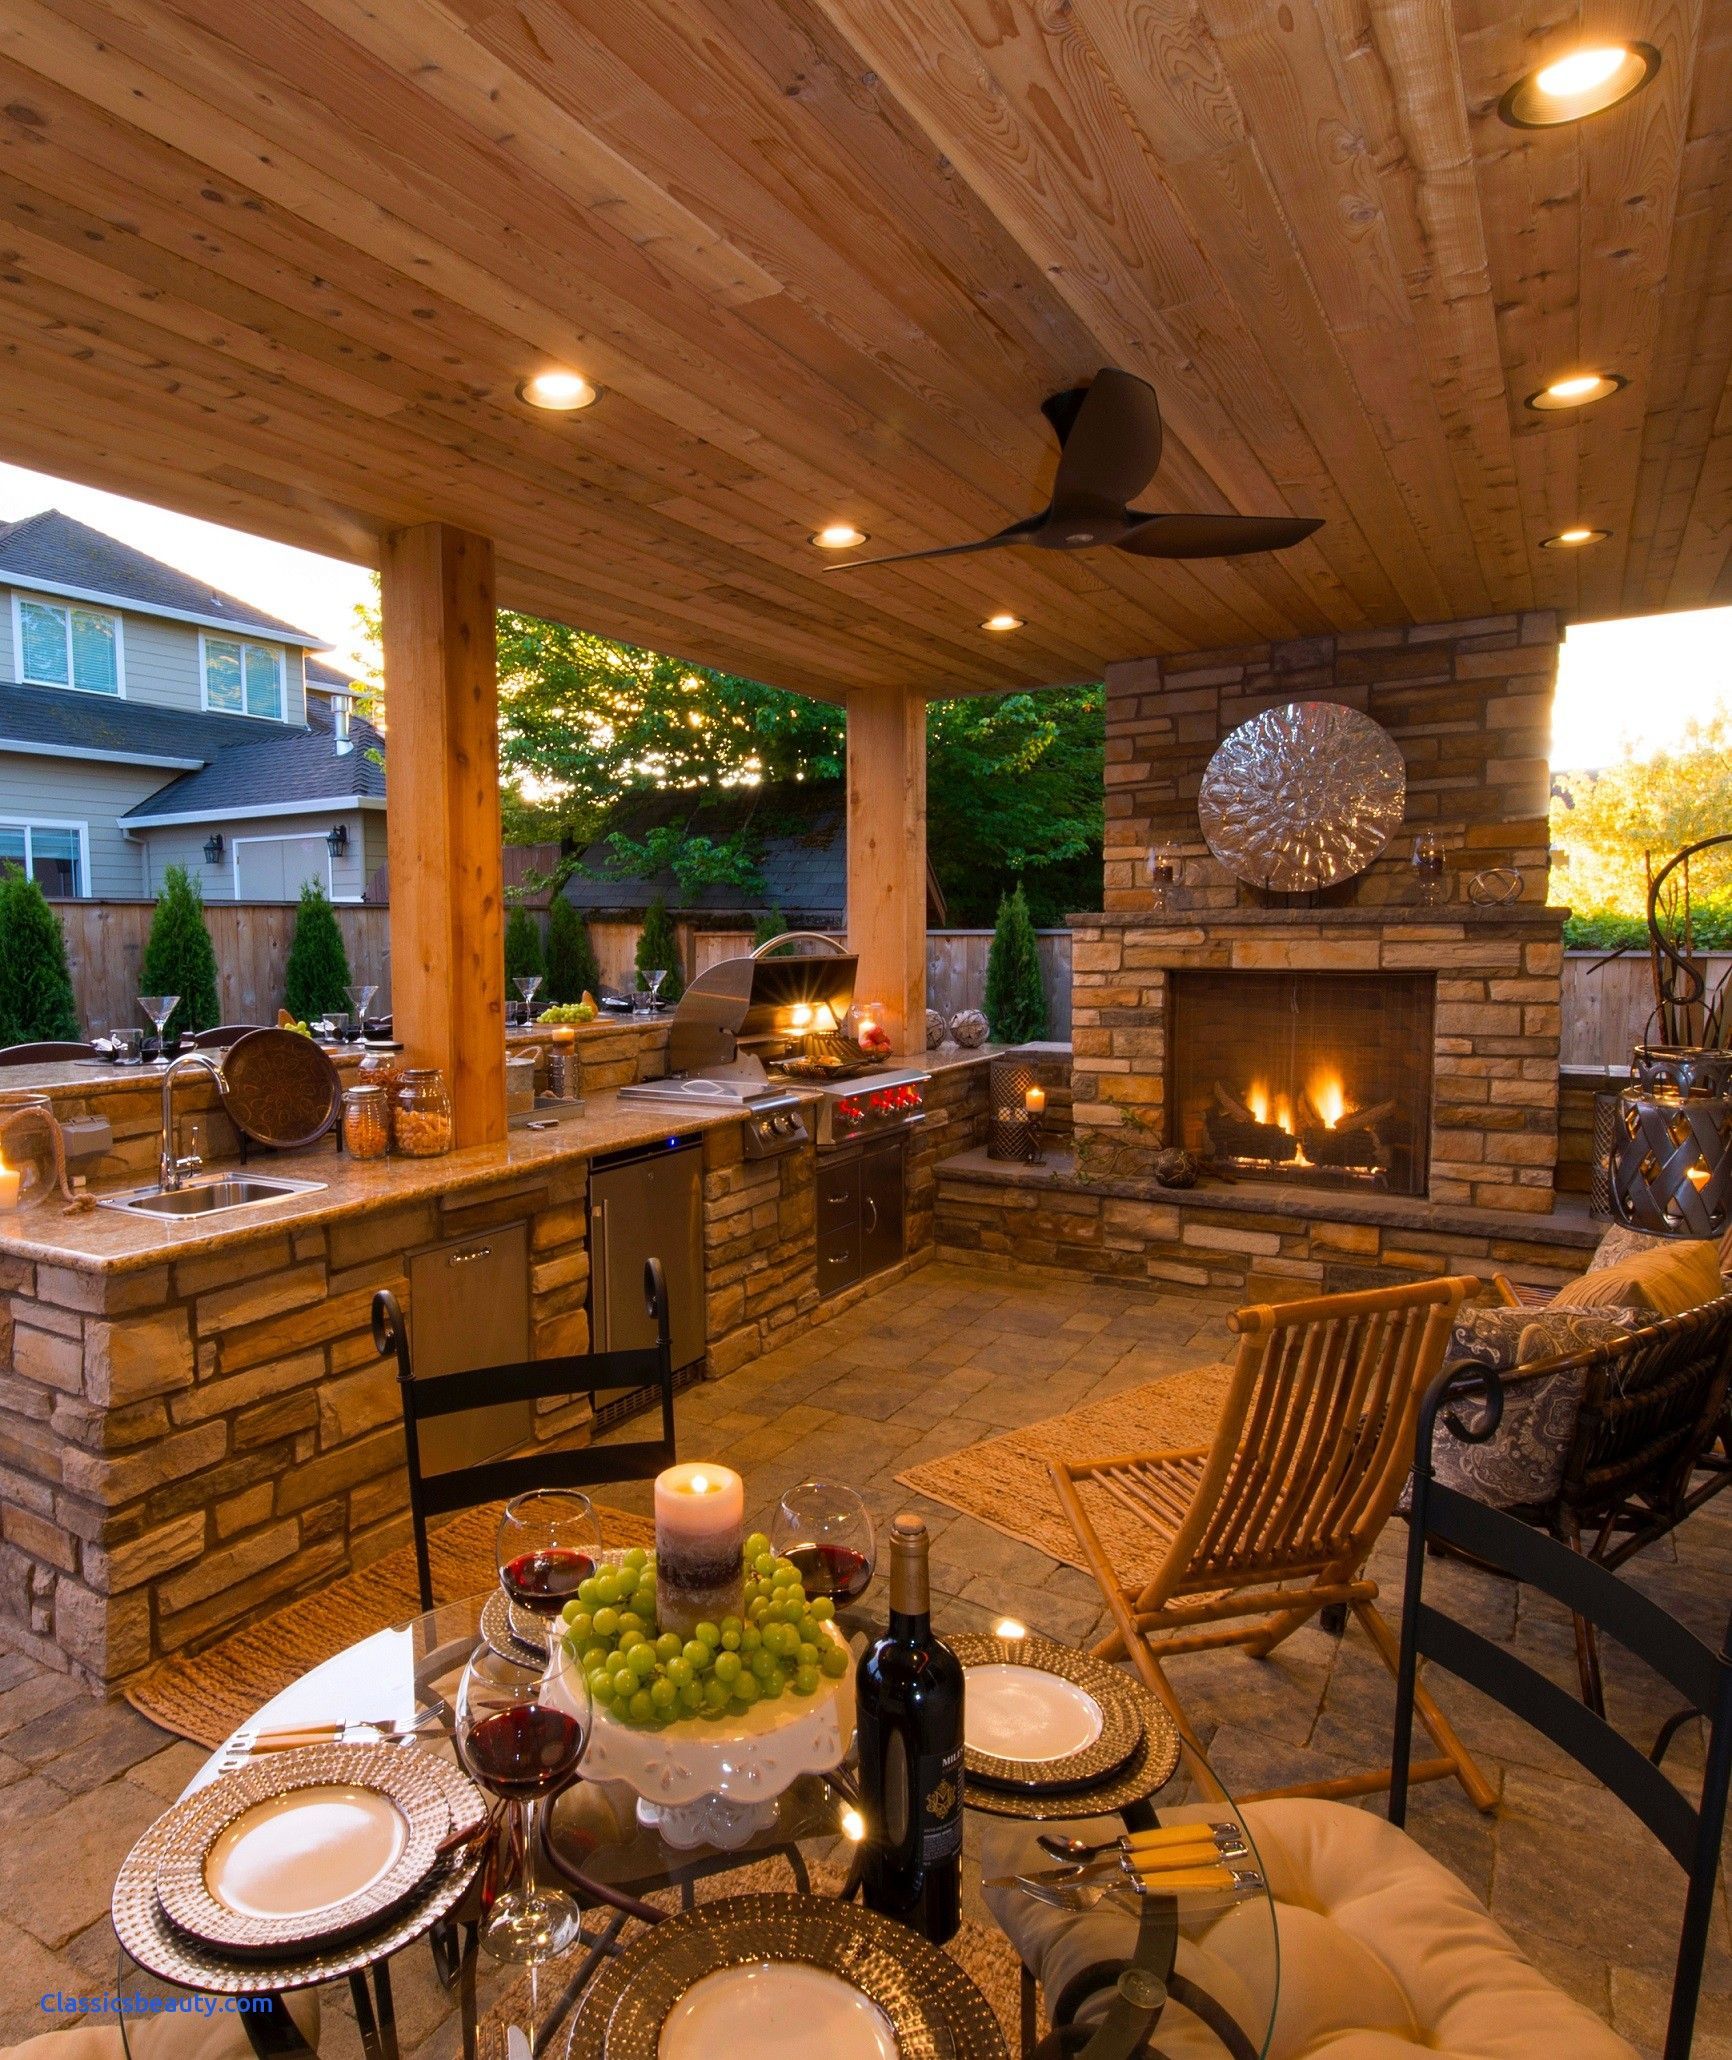 11 Best Outdoor Kitchen Ideas and Designs for Your Stunning Kitchen -   Great Outdoor Kitchen Ideas